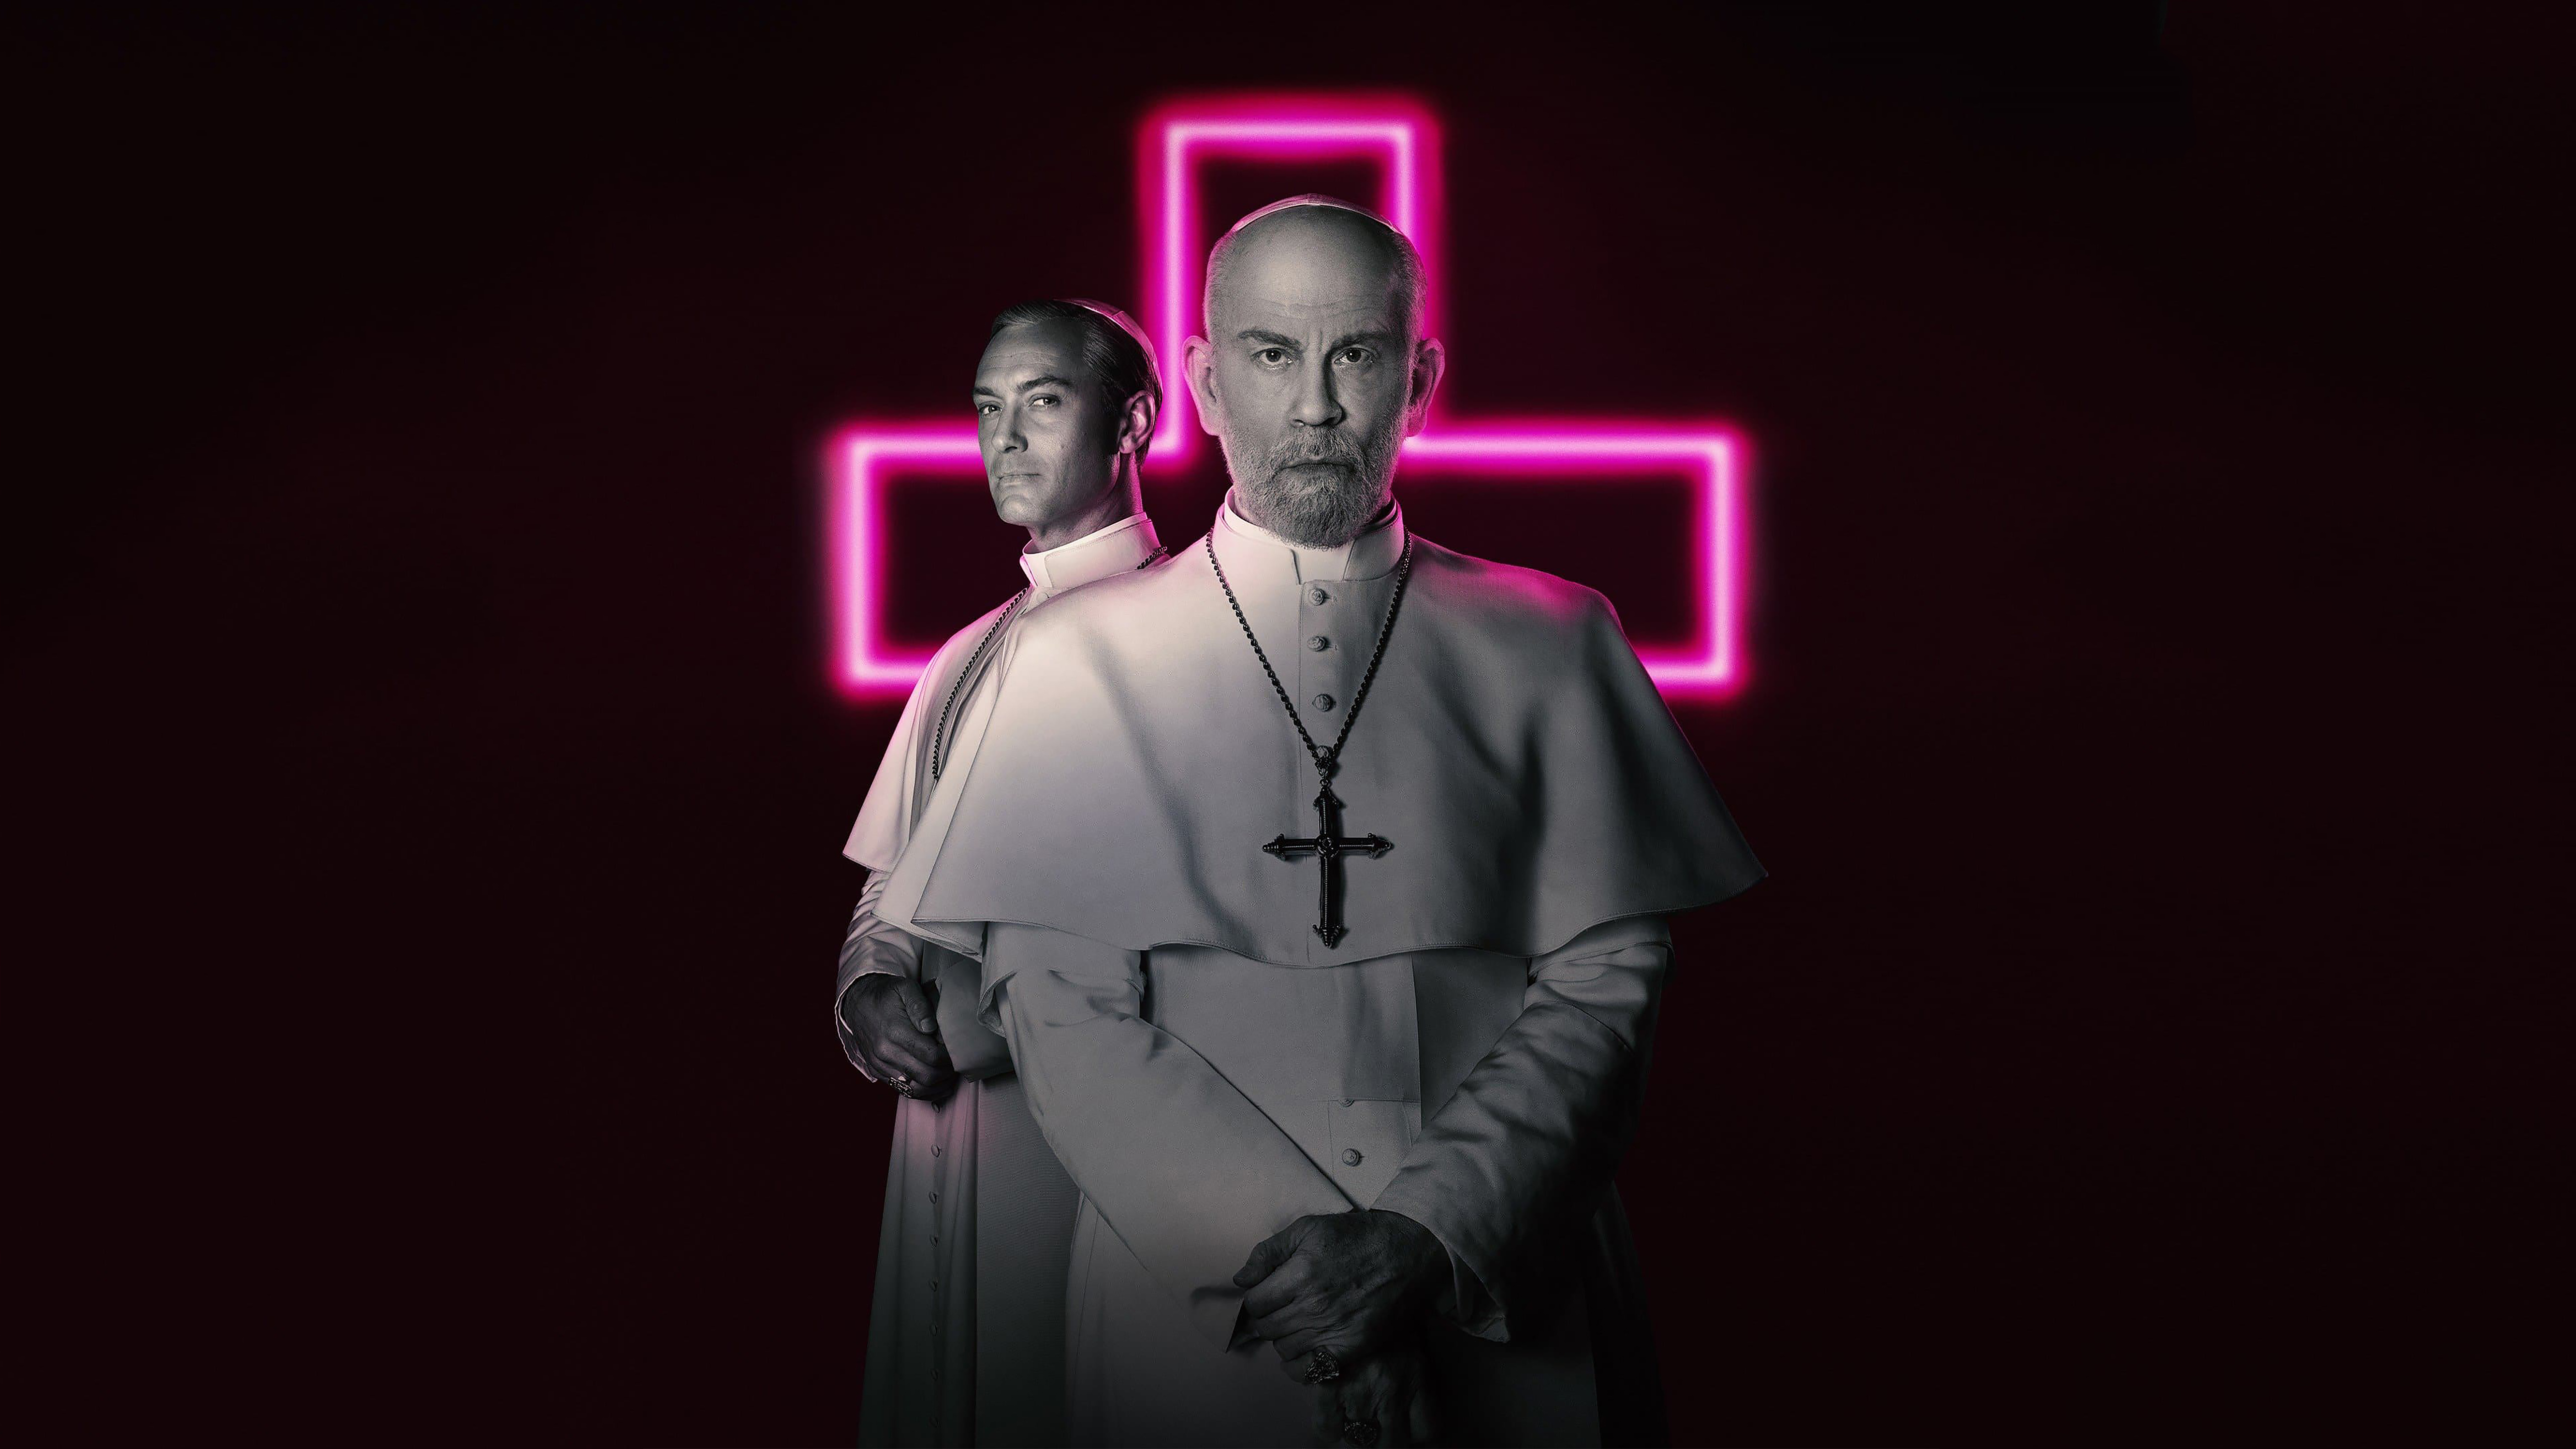 Cnn Pope Series Poster Wallpapers